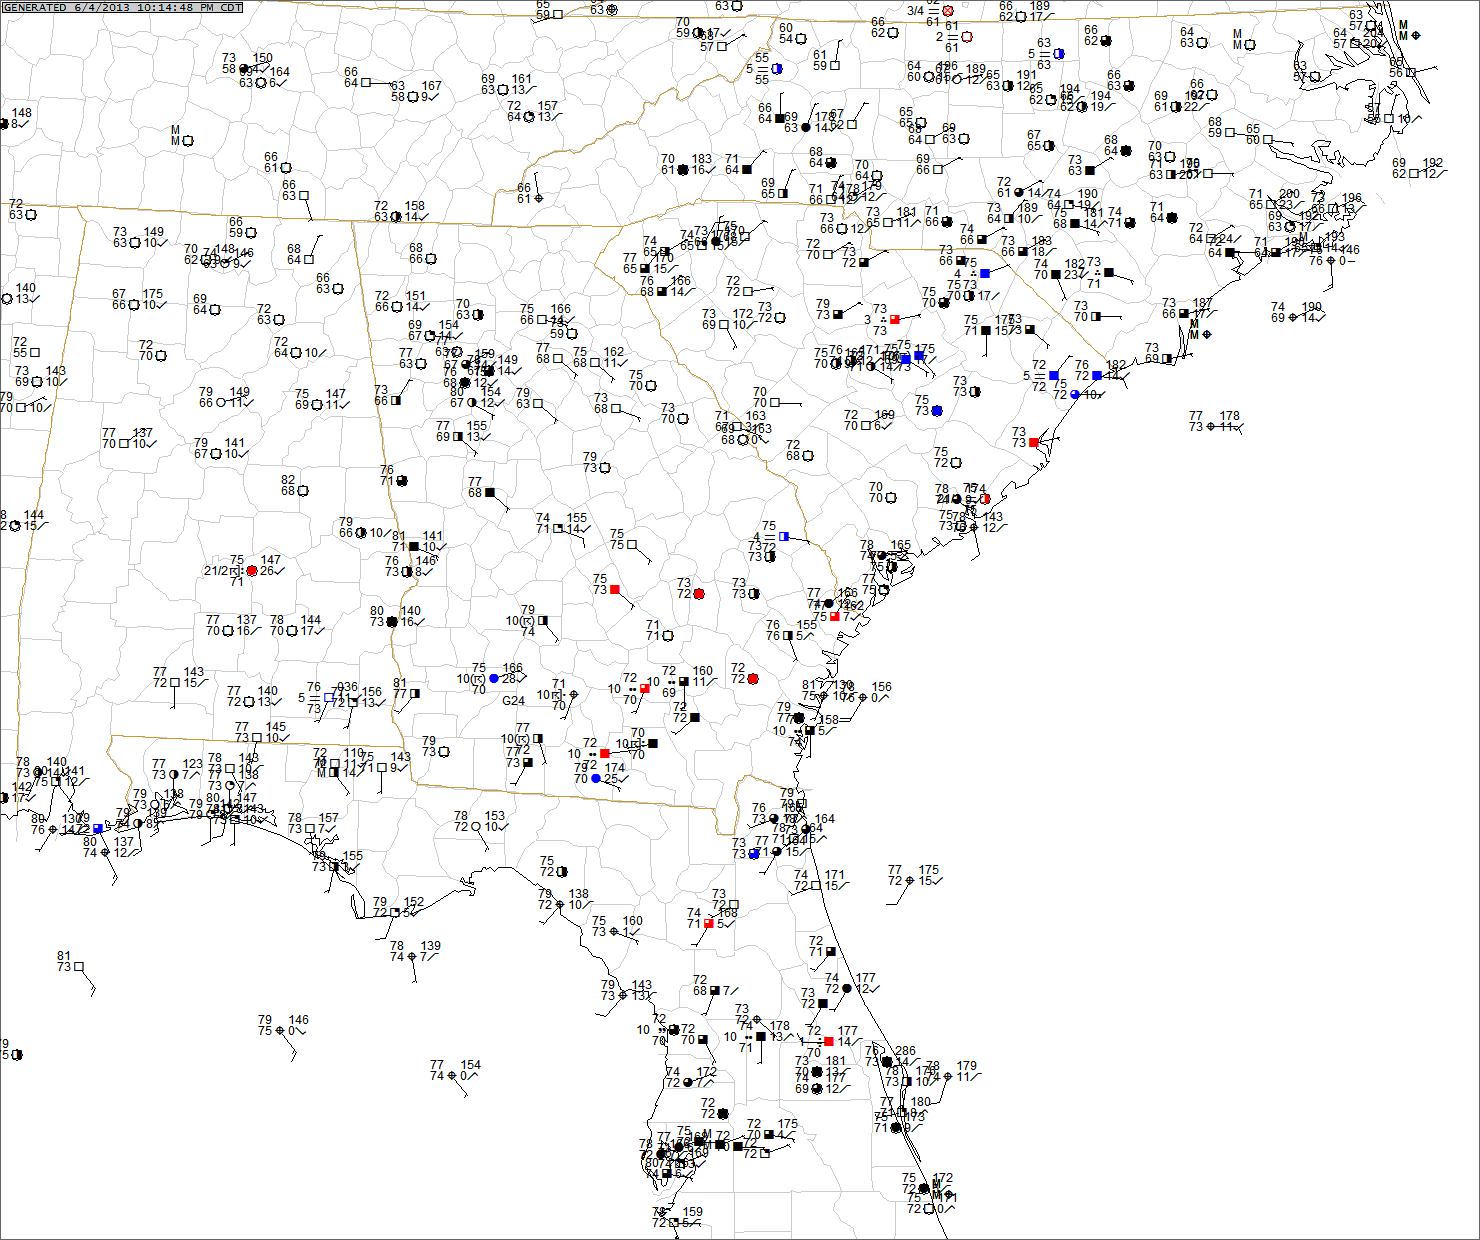 Current Conditions South Carolina